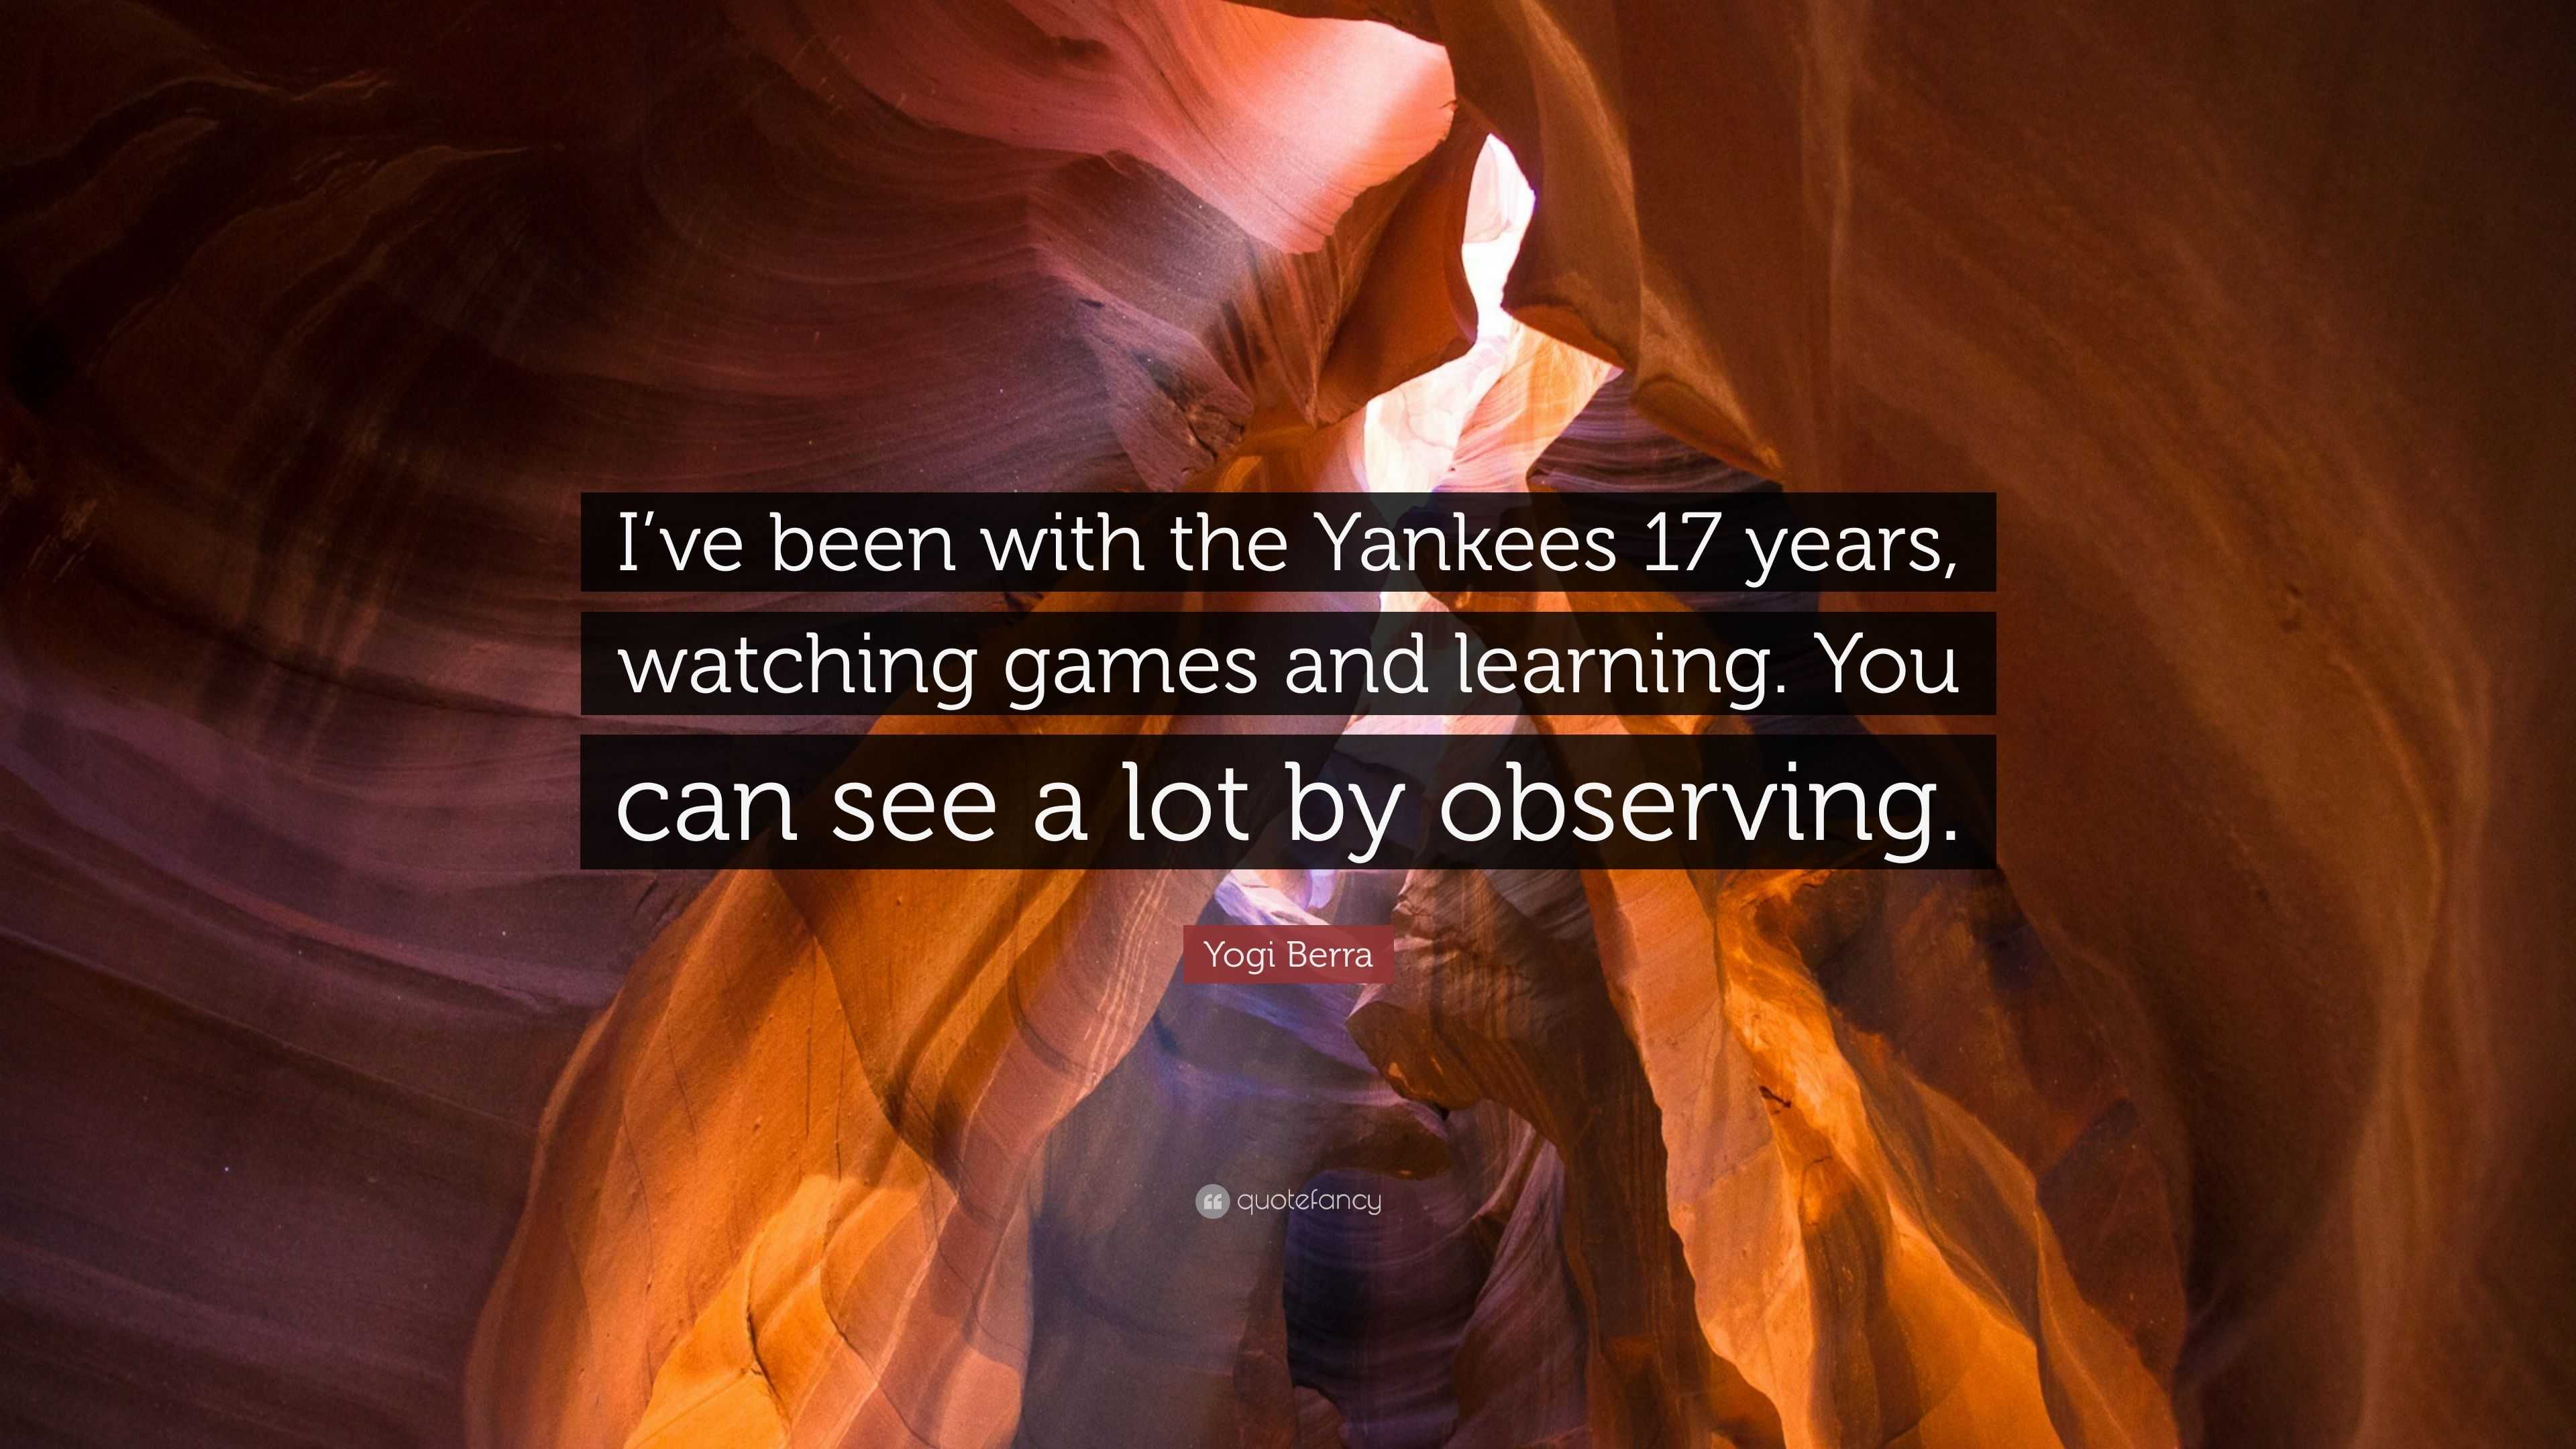 You Can Observe A Lot By Watching: What I've Learned About Teamwork From the Yankees and Life [Book]